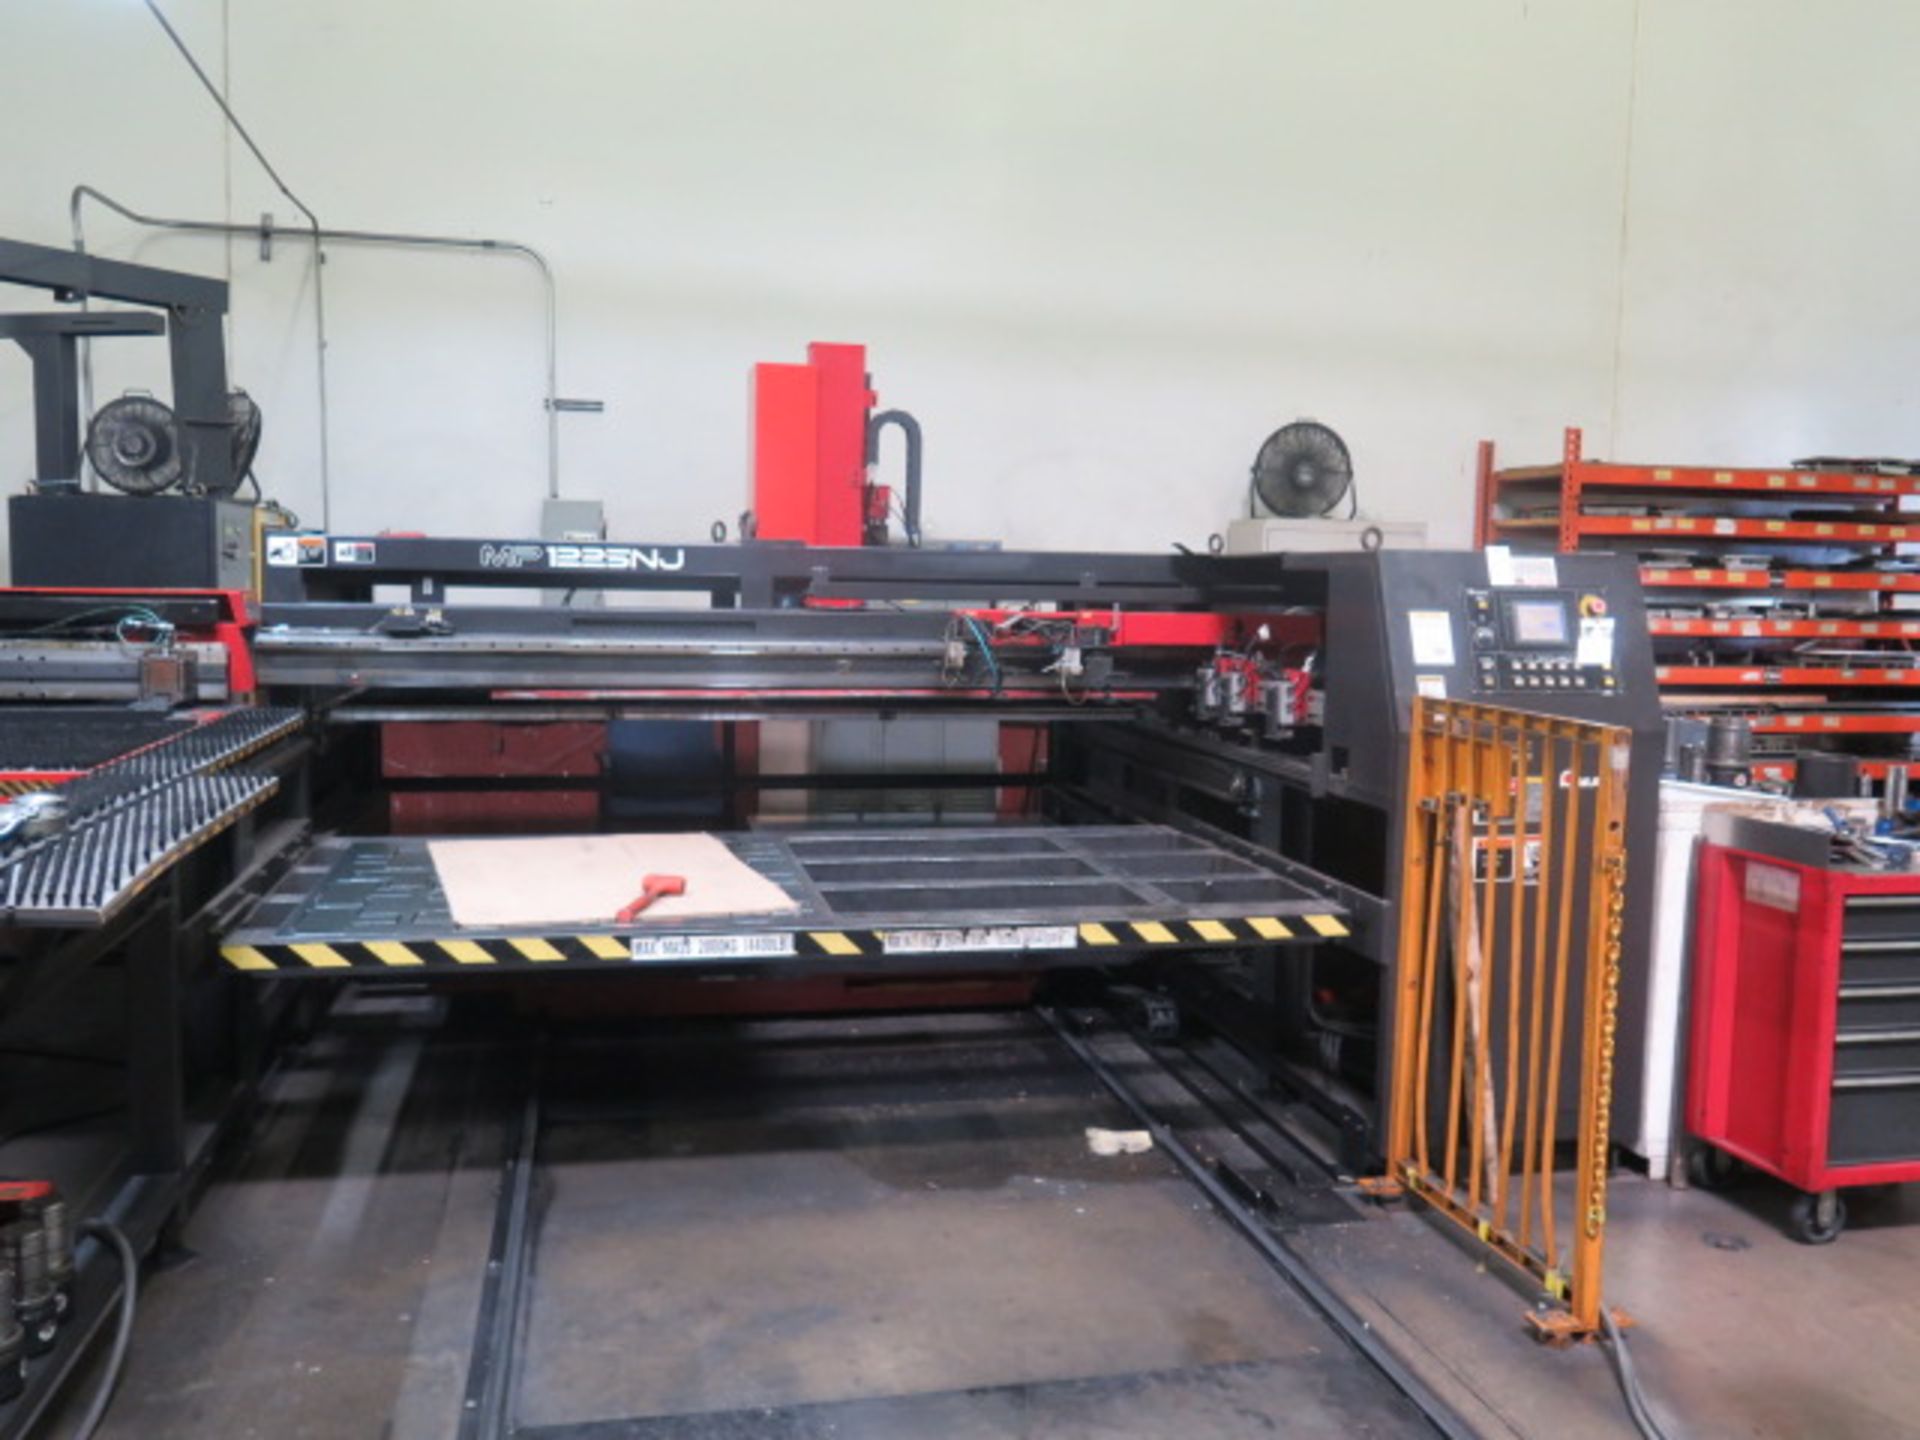 1998 Amada VIPROS 357 QUEEN 30 Ton CNC Turret Punch Press s/n 35730345 w/ O4P-C Controls, SOLD AS IS - Image 21 of 30